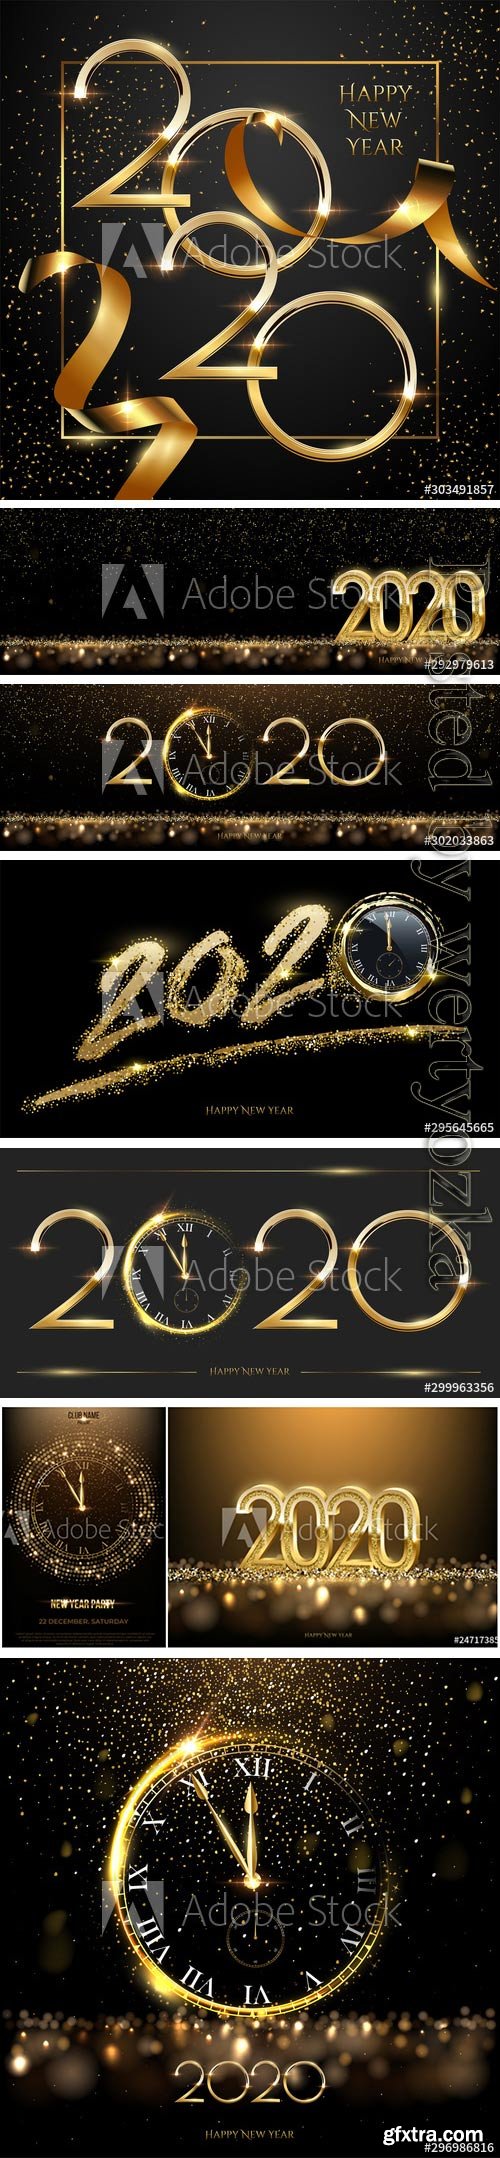 Golden 2020 Happy new year greeting card vector template